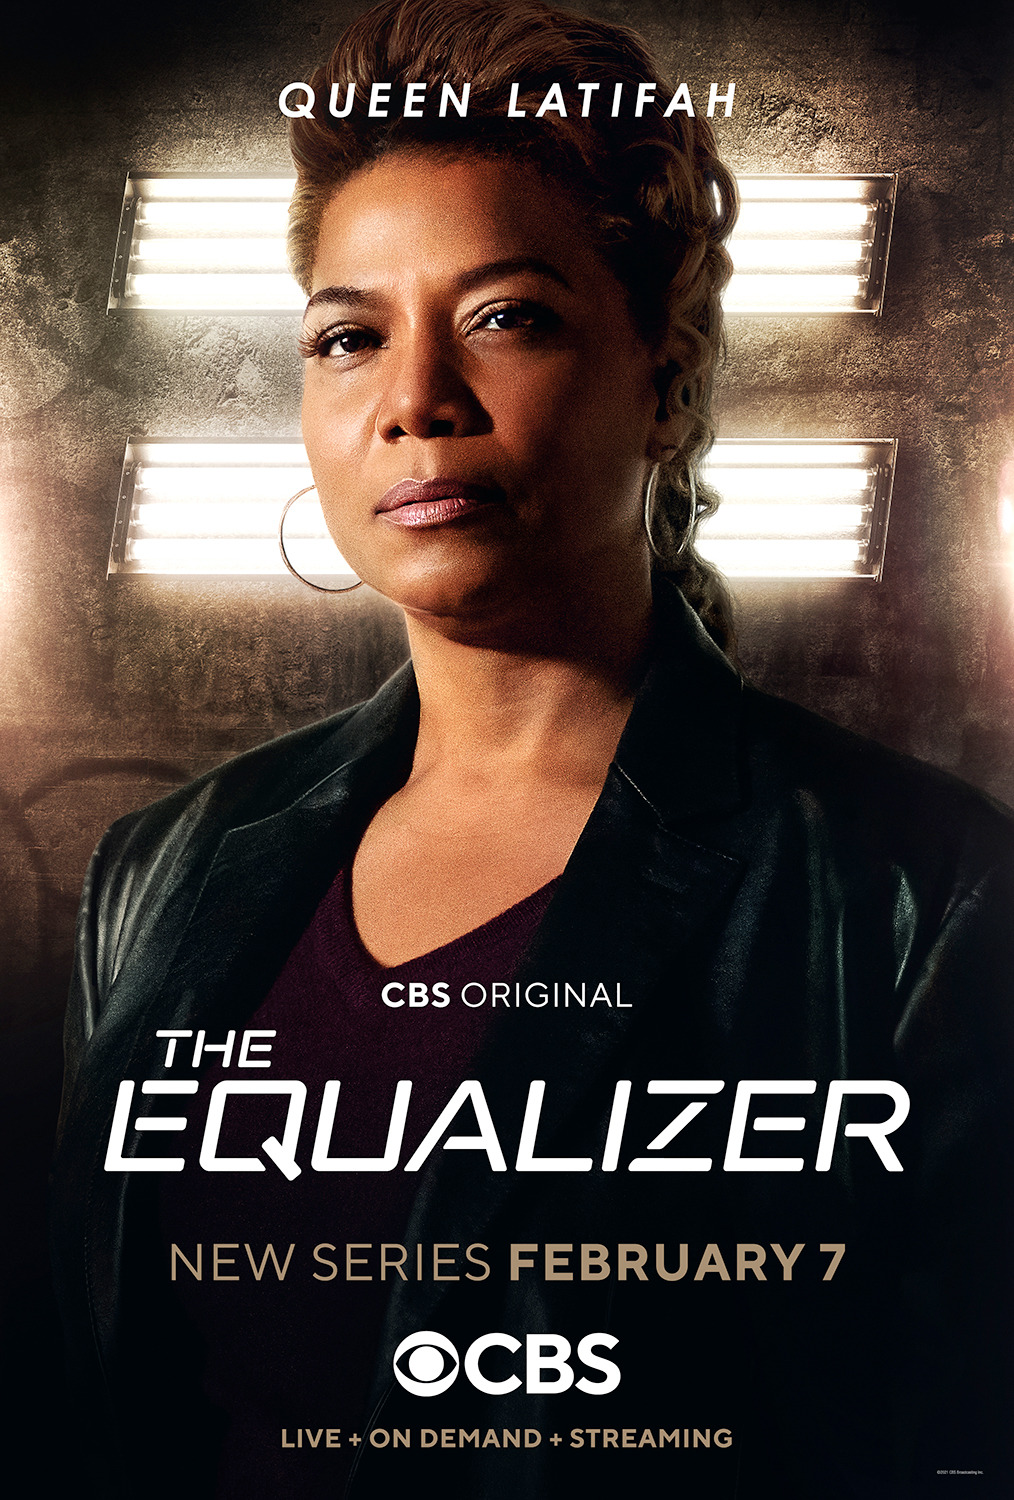 Extra Large TV Poster Image for The Equalizer (#2 of 4)